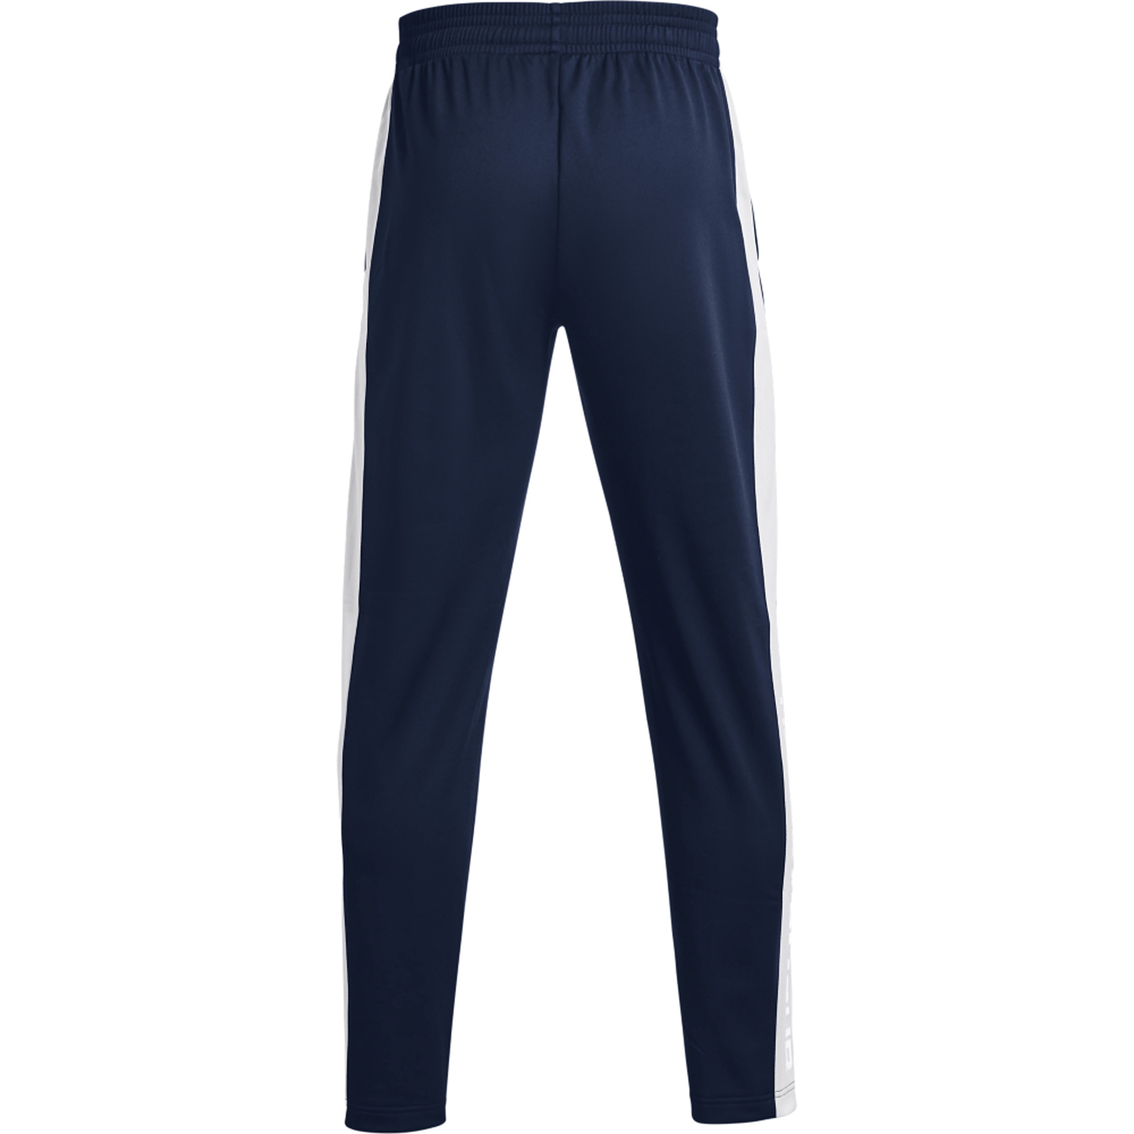 Under Armour 31 In. Brawler Pants, Pants, Clothing & Accessories